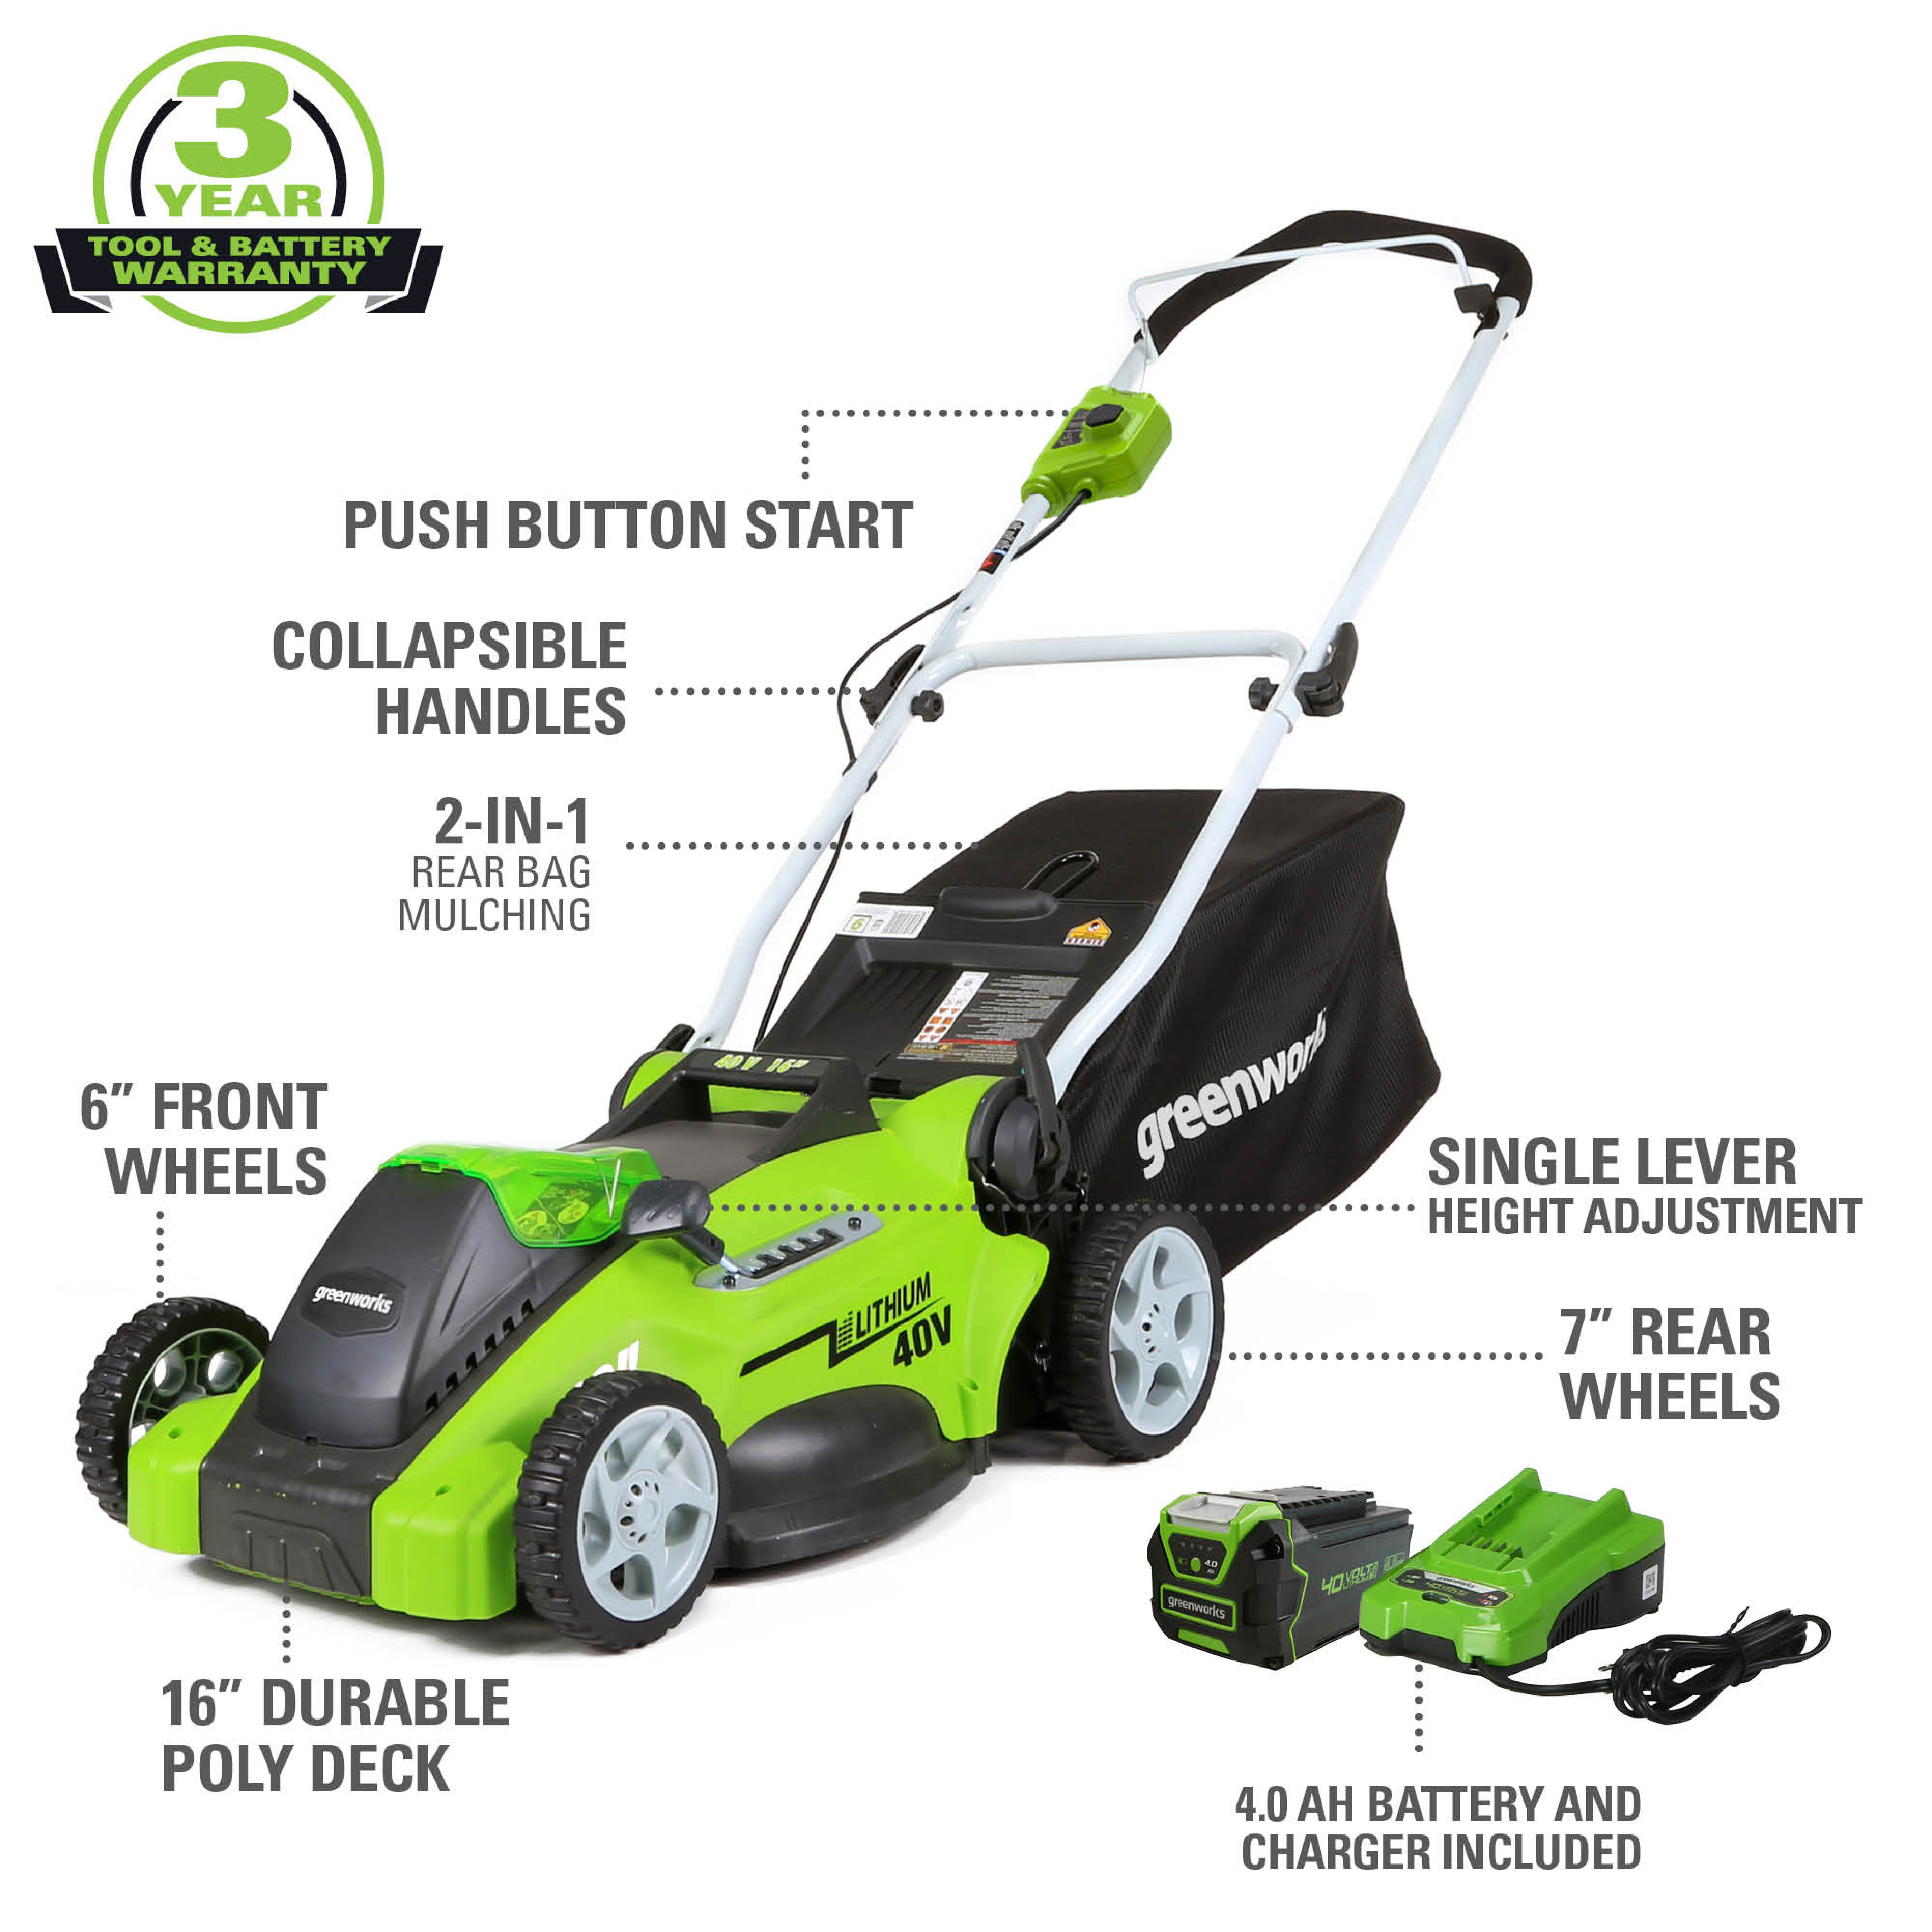 Greenworks 40V 16" Battery Powered Push Lawn Mower with 4.0 Ah Battery 25322 - image 3 of 16